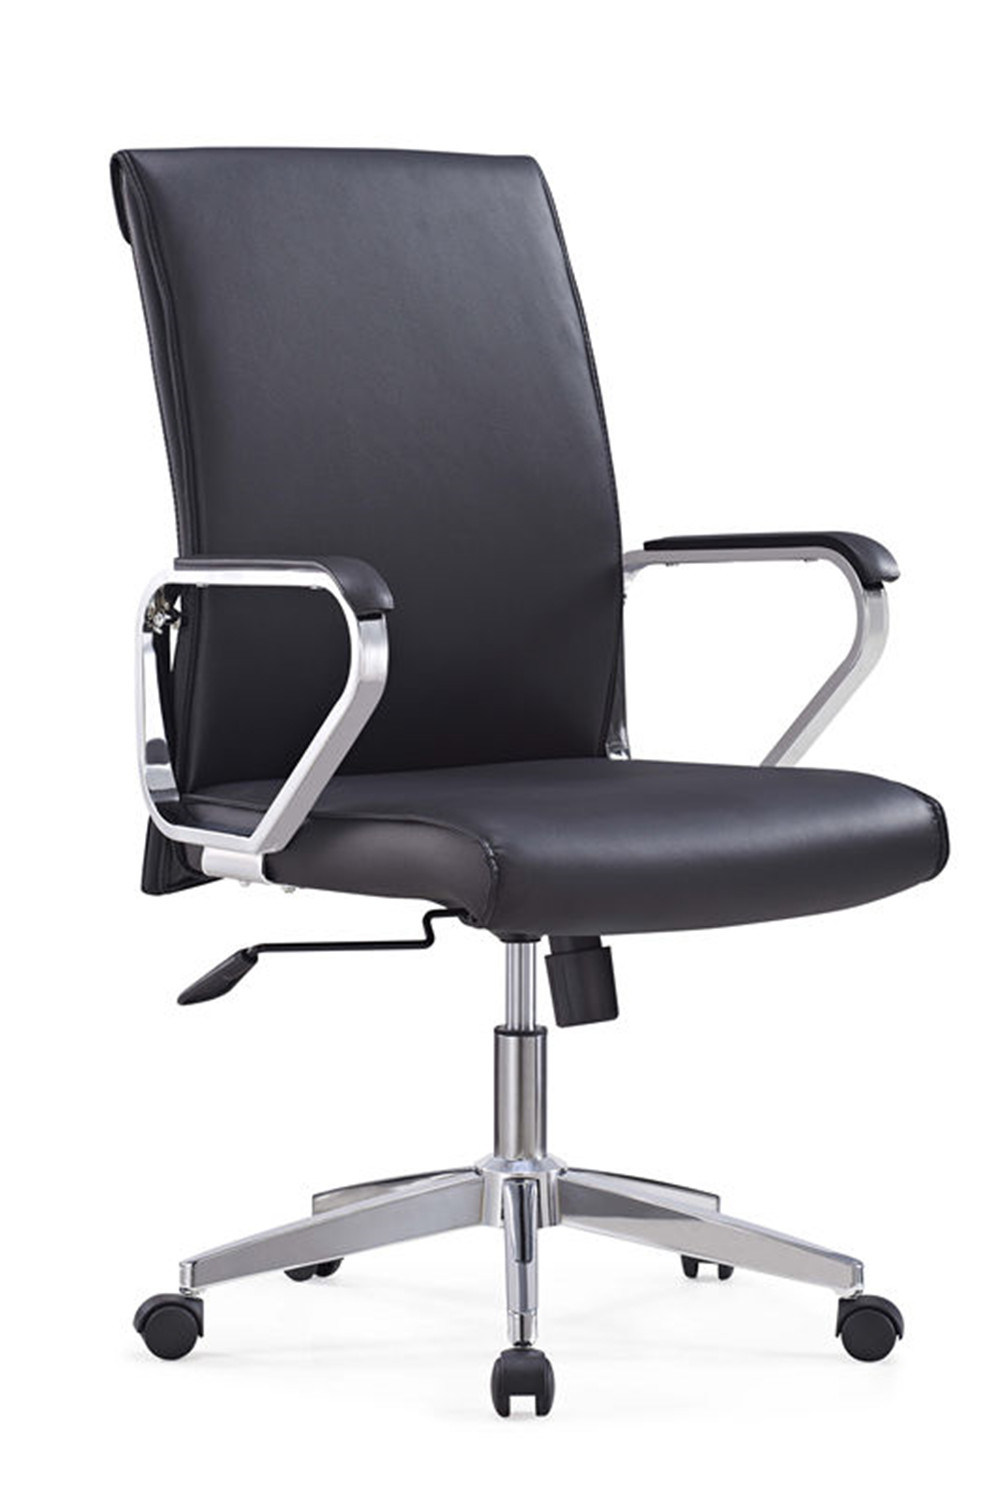 High Back PU Leather Director Chair